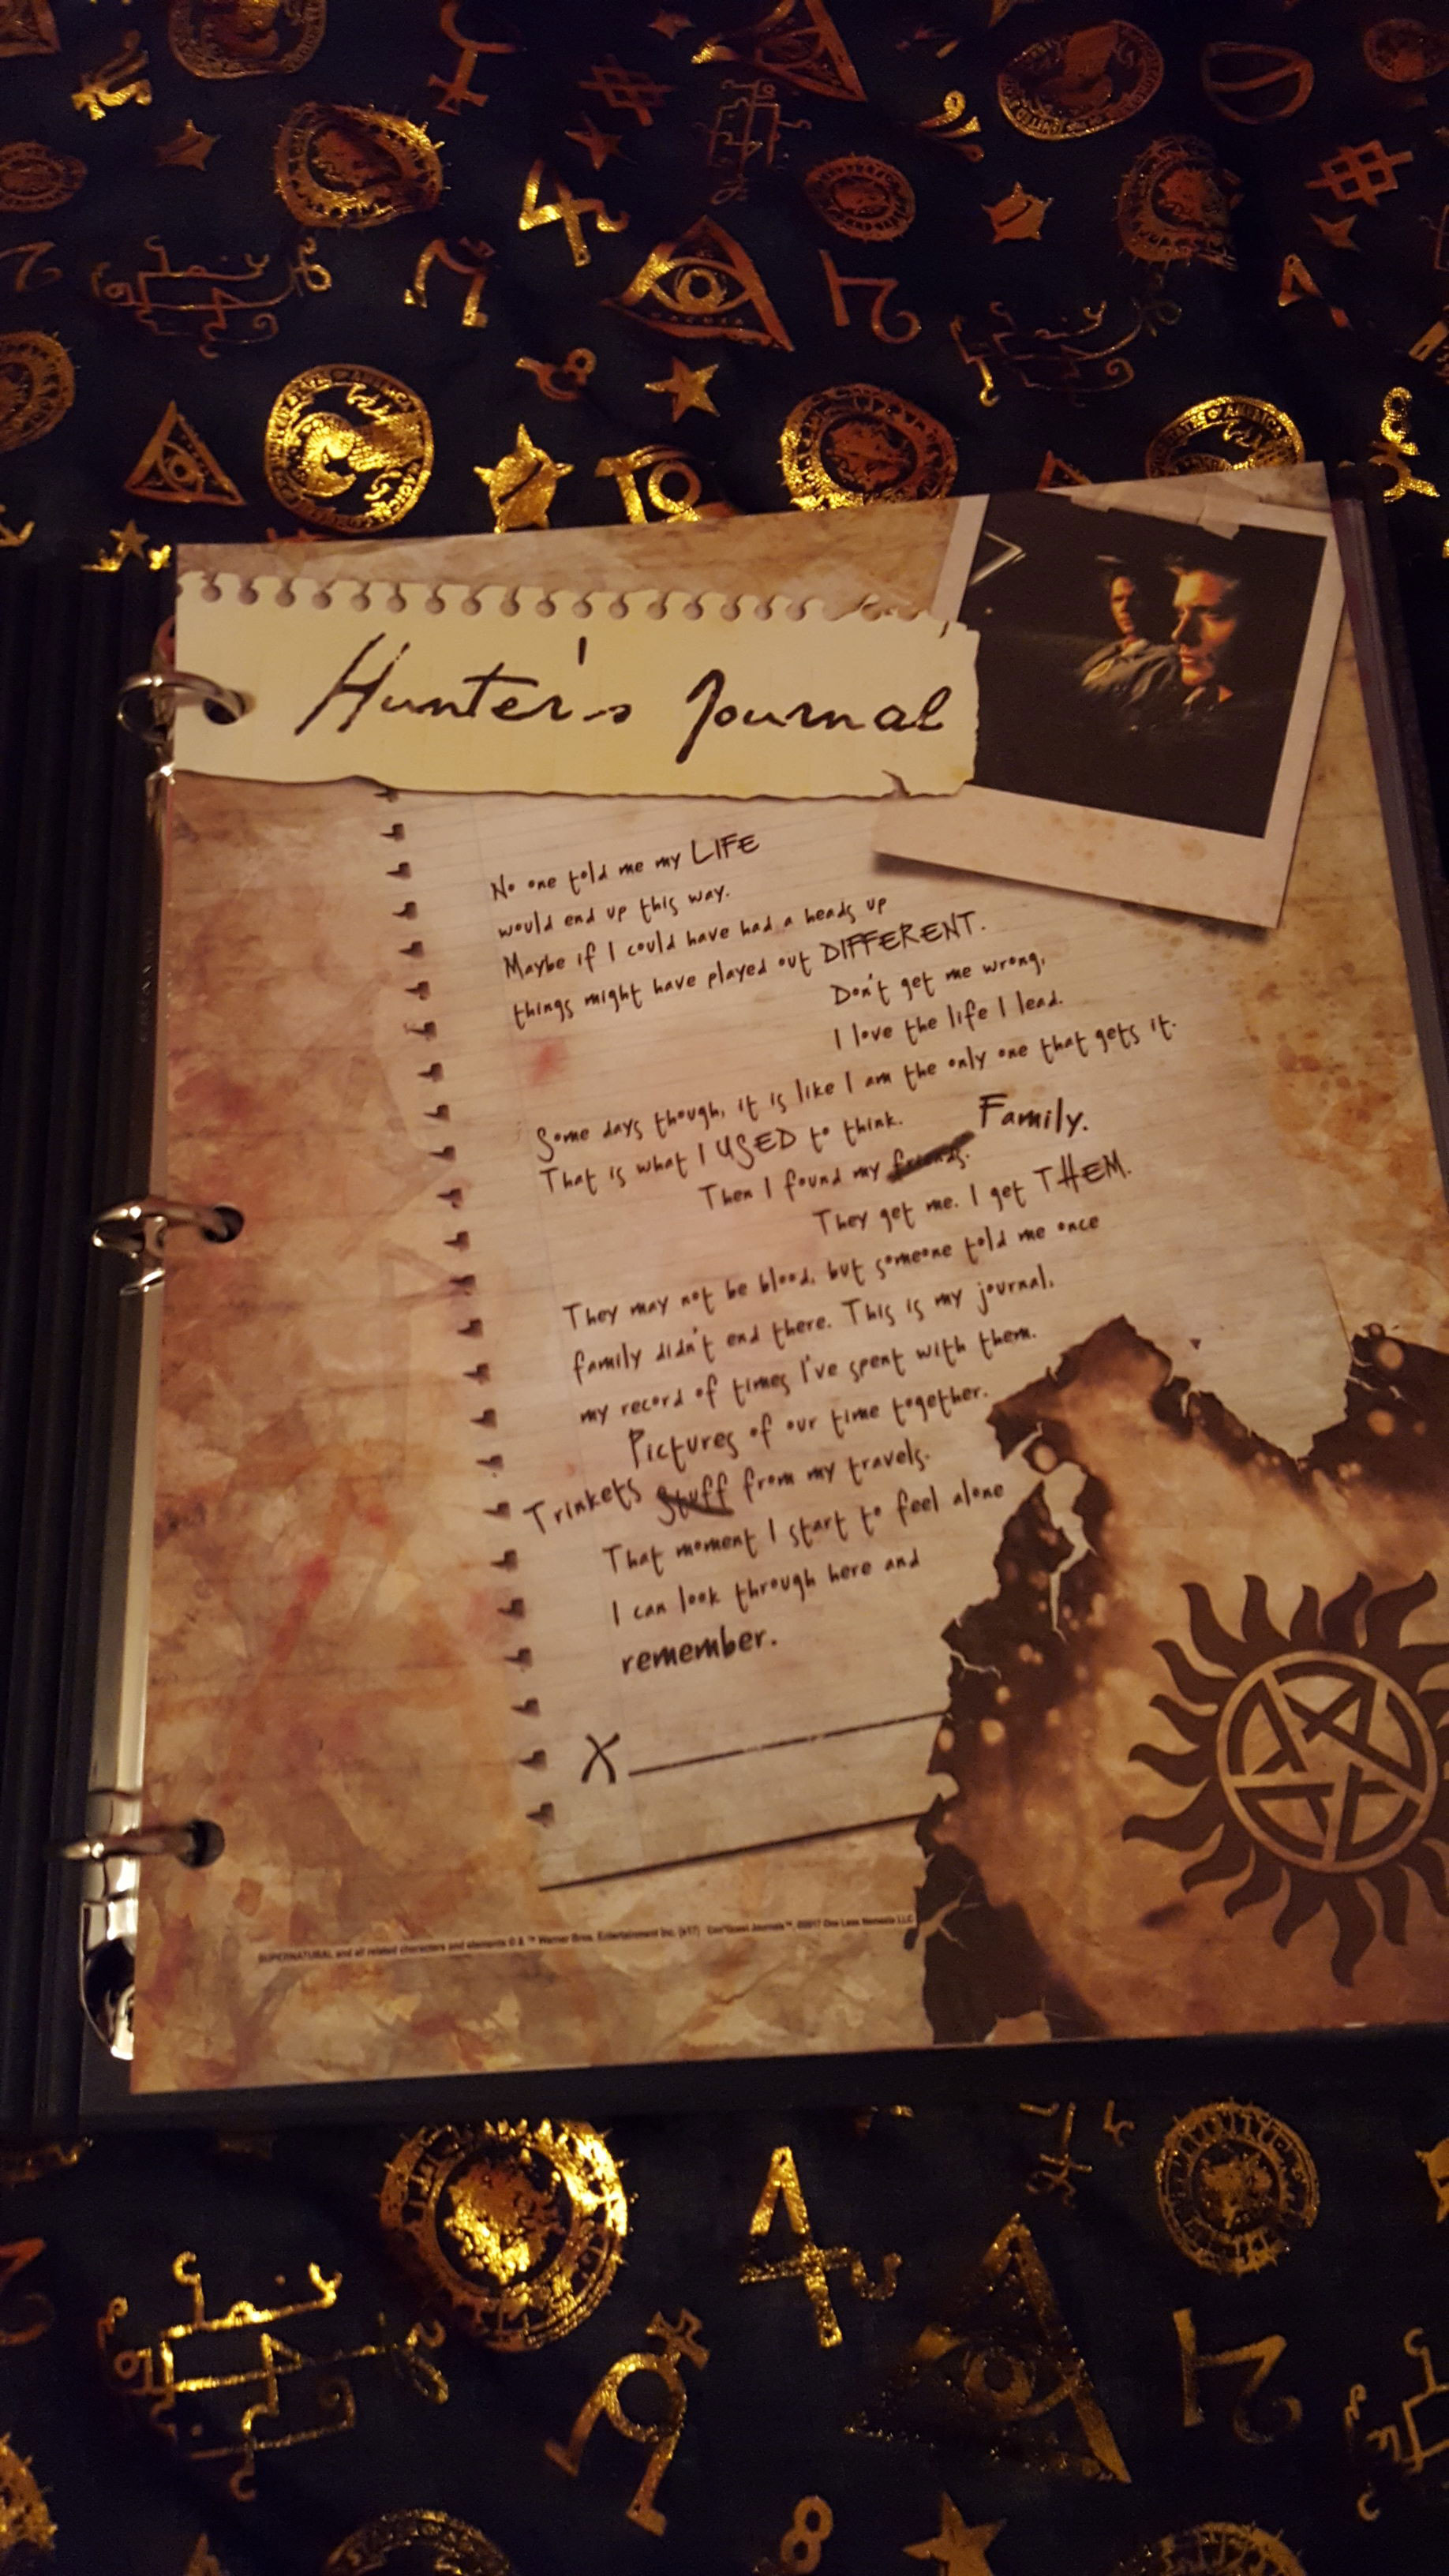 Hunter’s journal, page 1